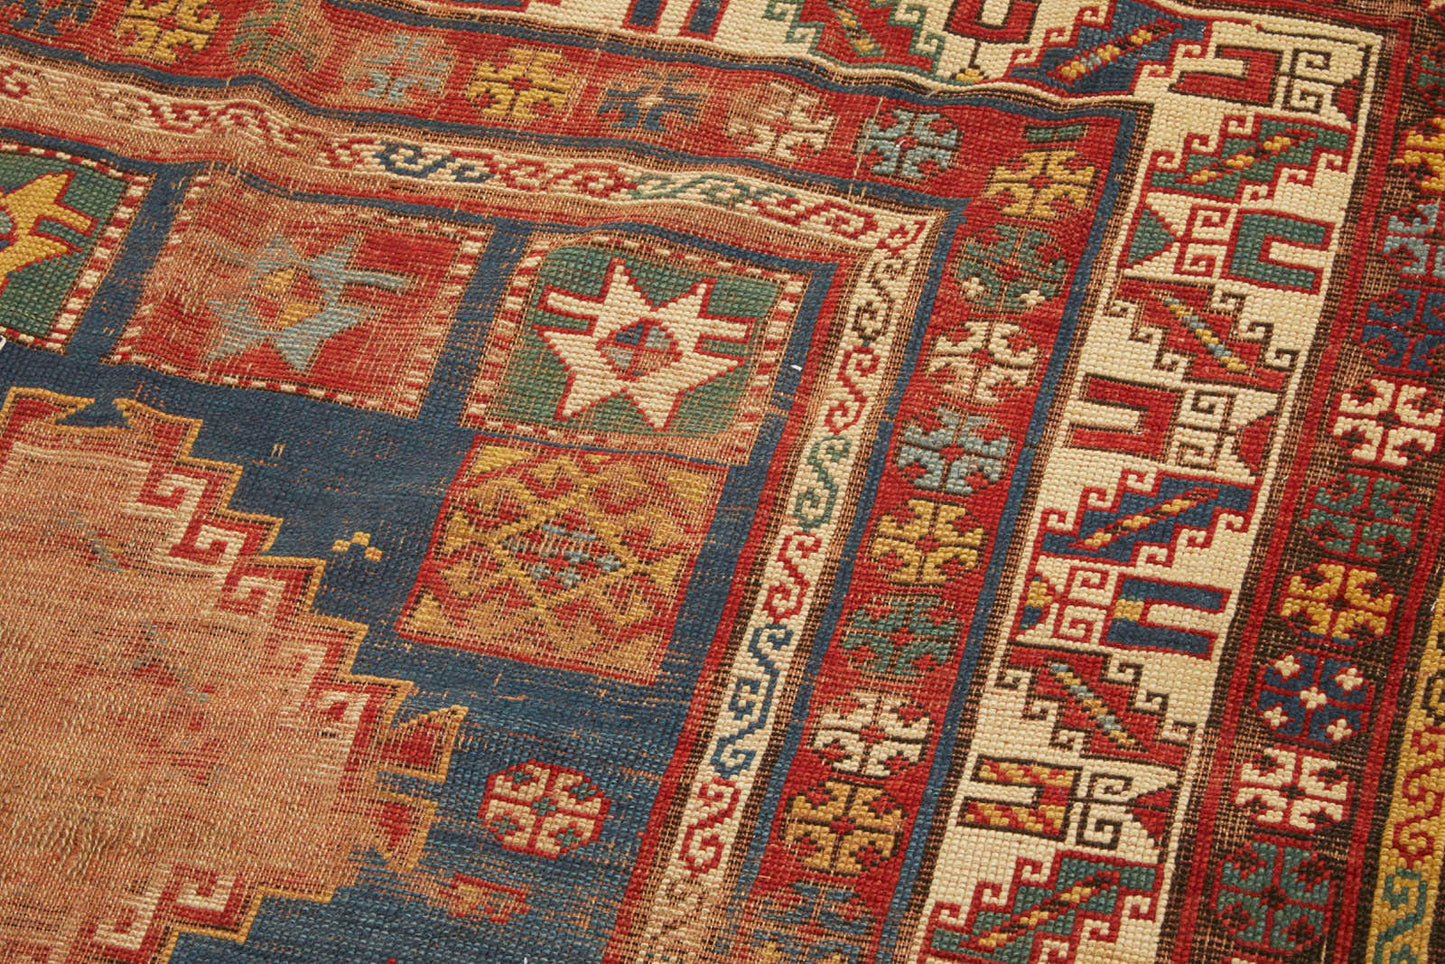 Hand woven antique Kazak Persian Rug - Blue base with red, cream and gold border - Available from King Kennedy Rugs Los Angeles